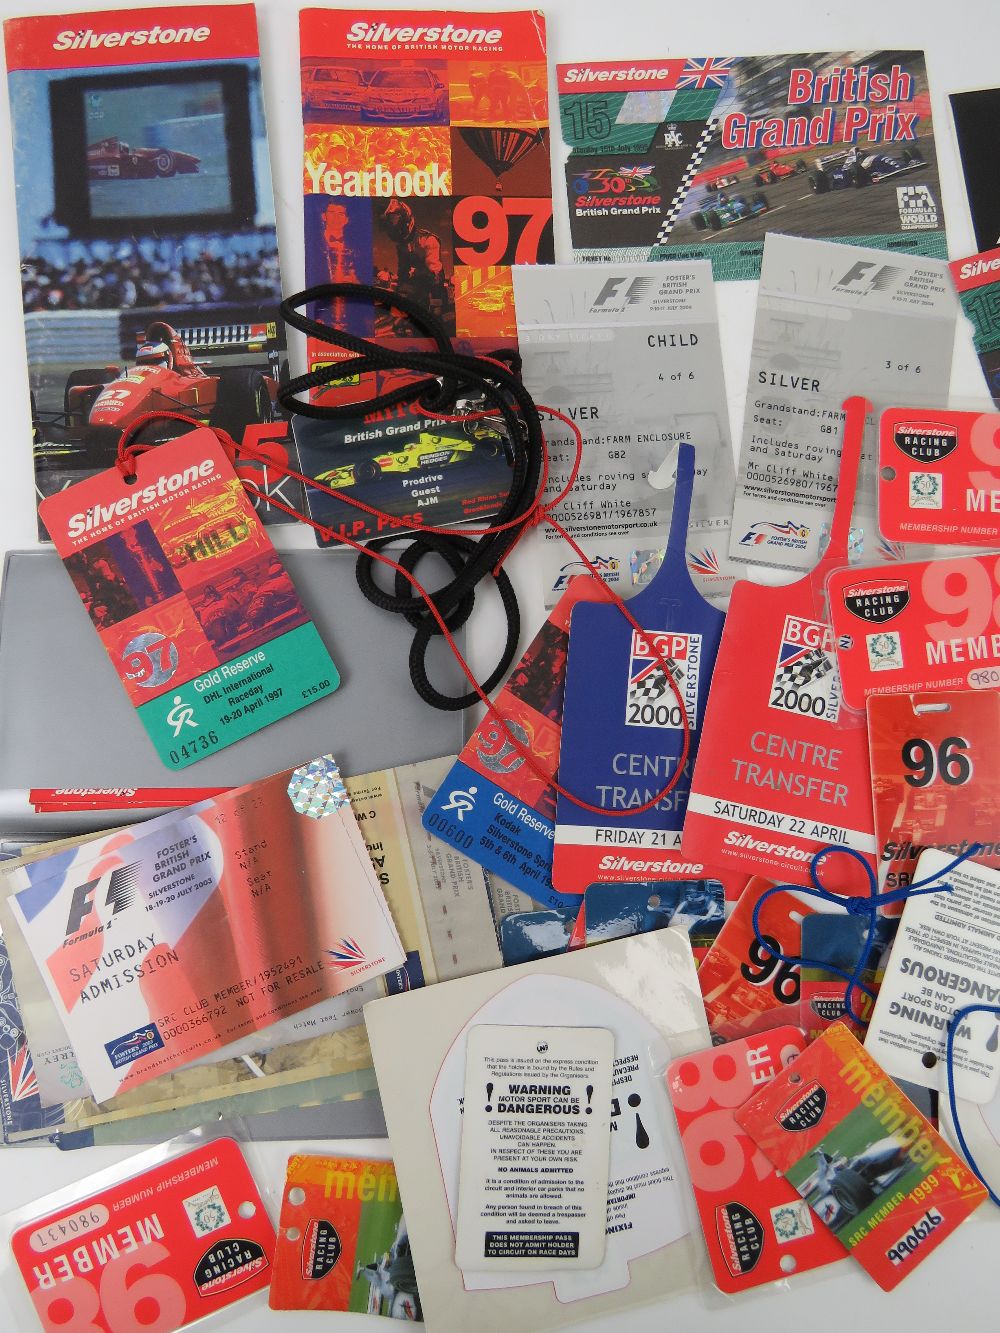 A quantity of assorted British Grand Prix and motor racing meet lanyards, year books, and tickets. - Image 2 of 3